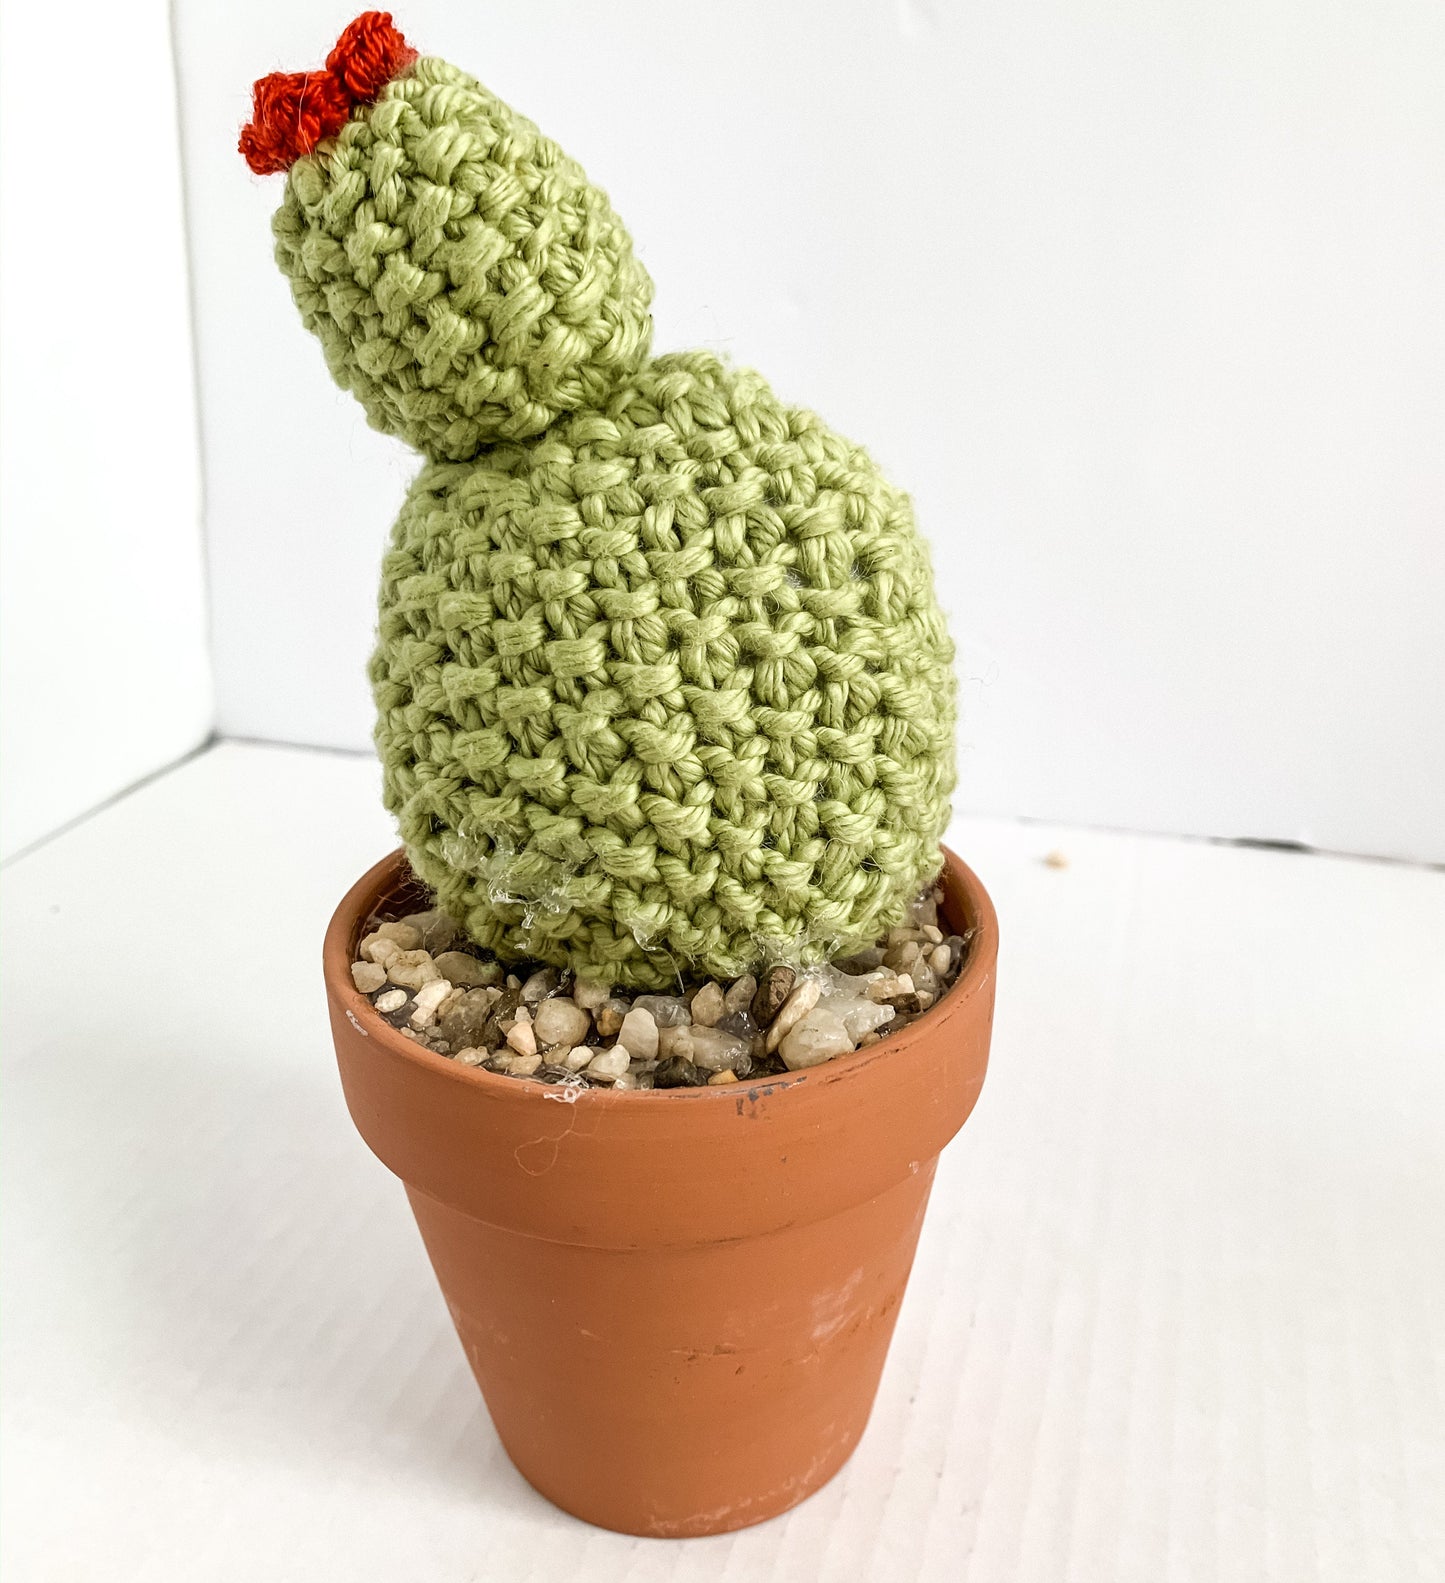 Knit Cactus // Prickly Pear, Knit Cactus Plant with Flower Planted in Terracotta Pot // Boho Home Decor// Home Office Decor